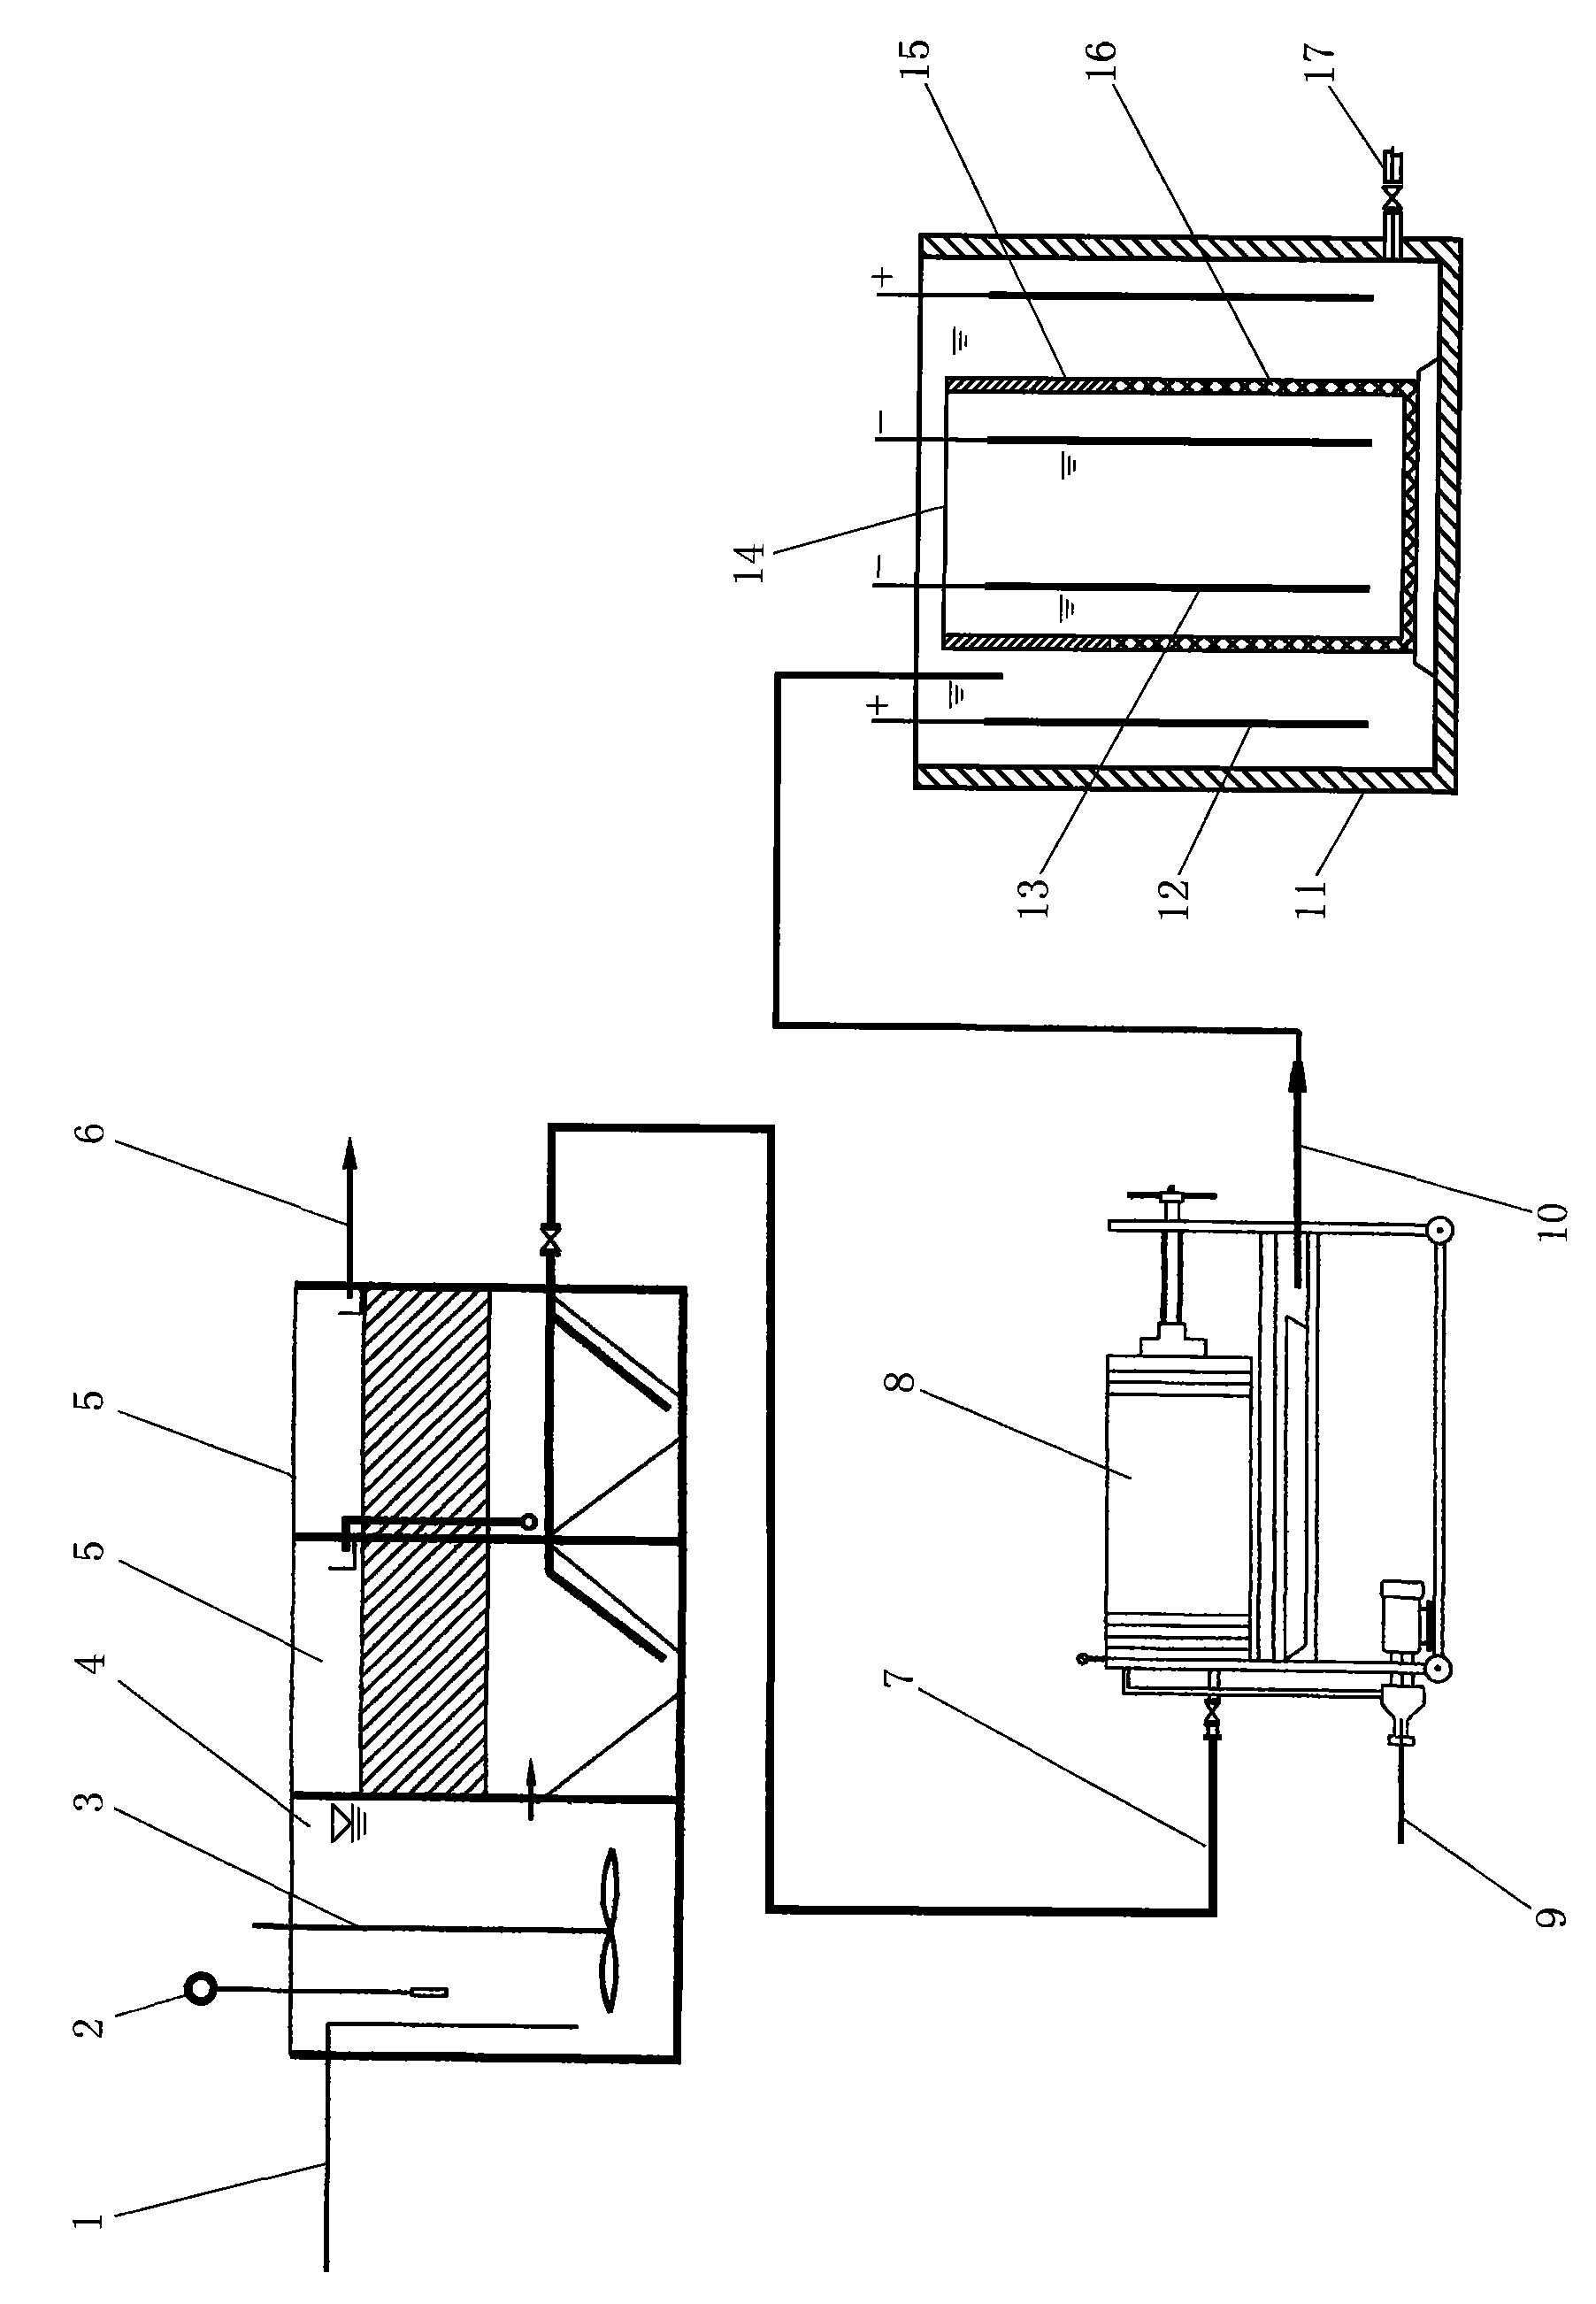 Method for electrolyzing and recovering hexavalent chrome in chromium-electroplating waste water